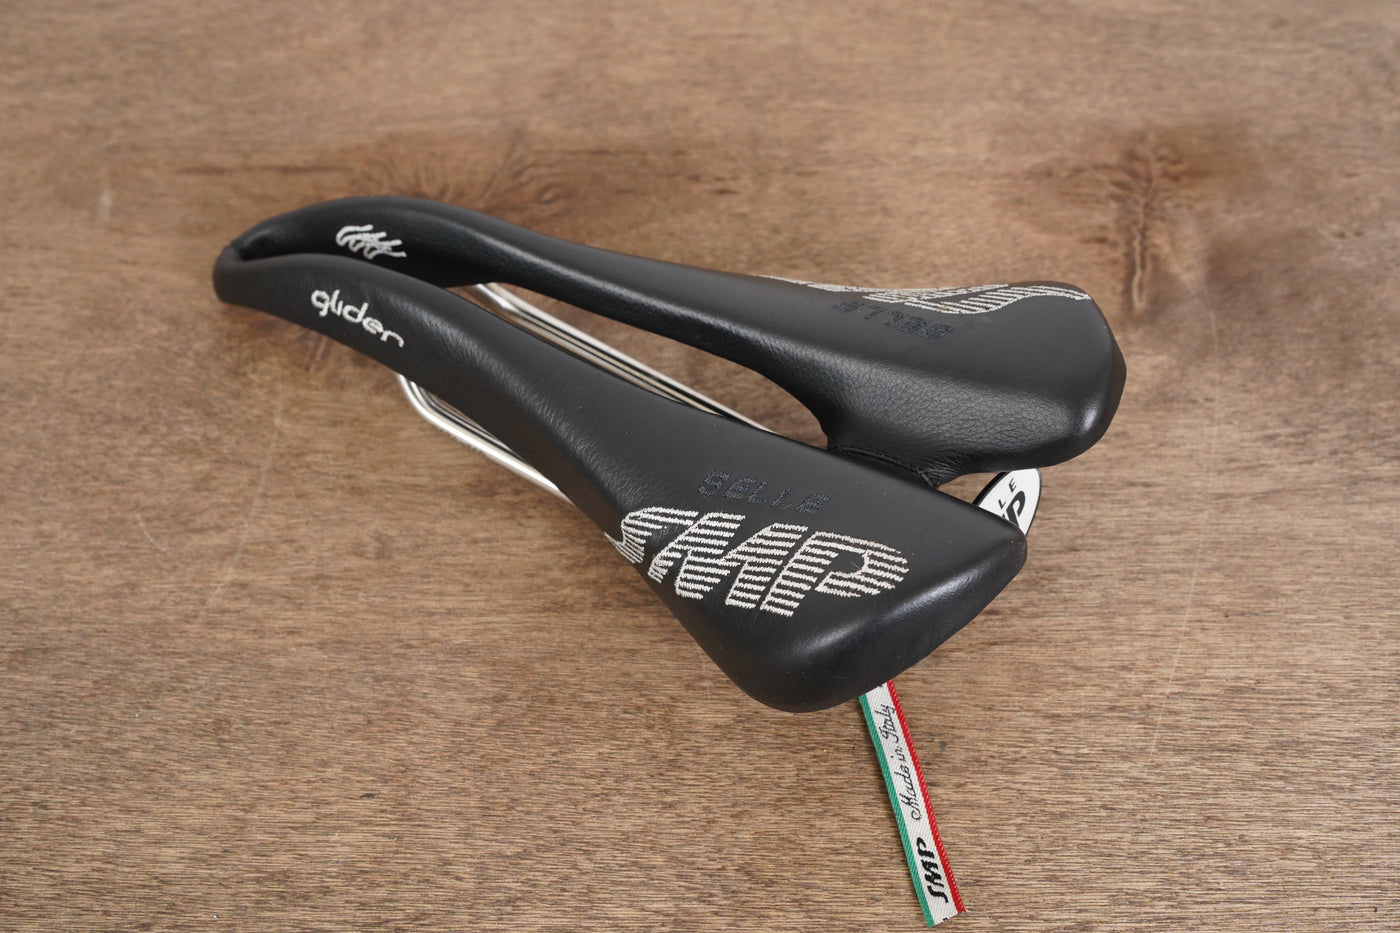 136mm Selle SMP Glider Stainless Steel Rail Road Saddle 293g